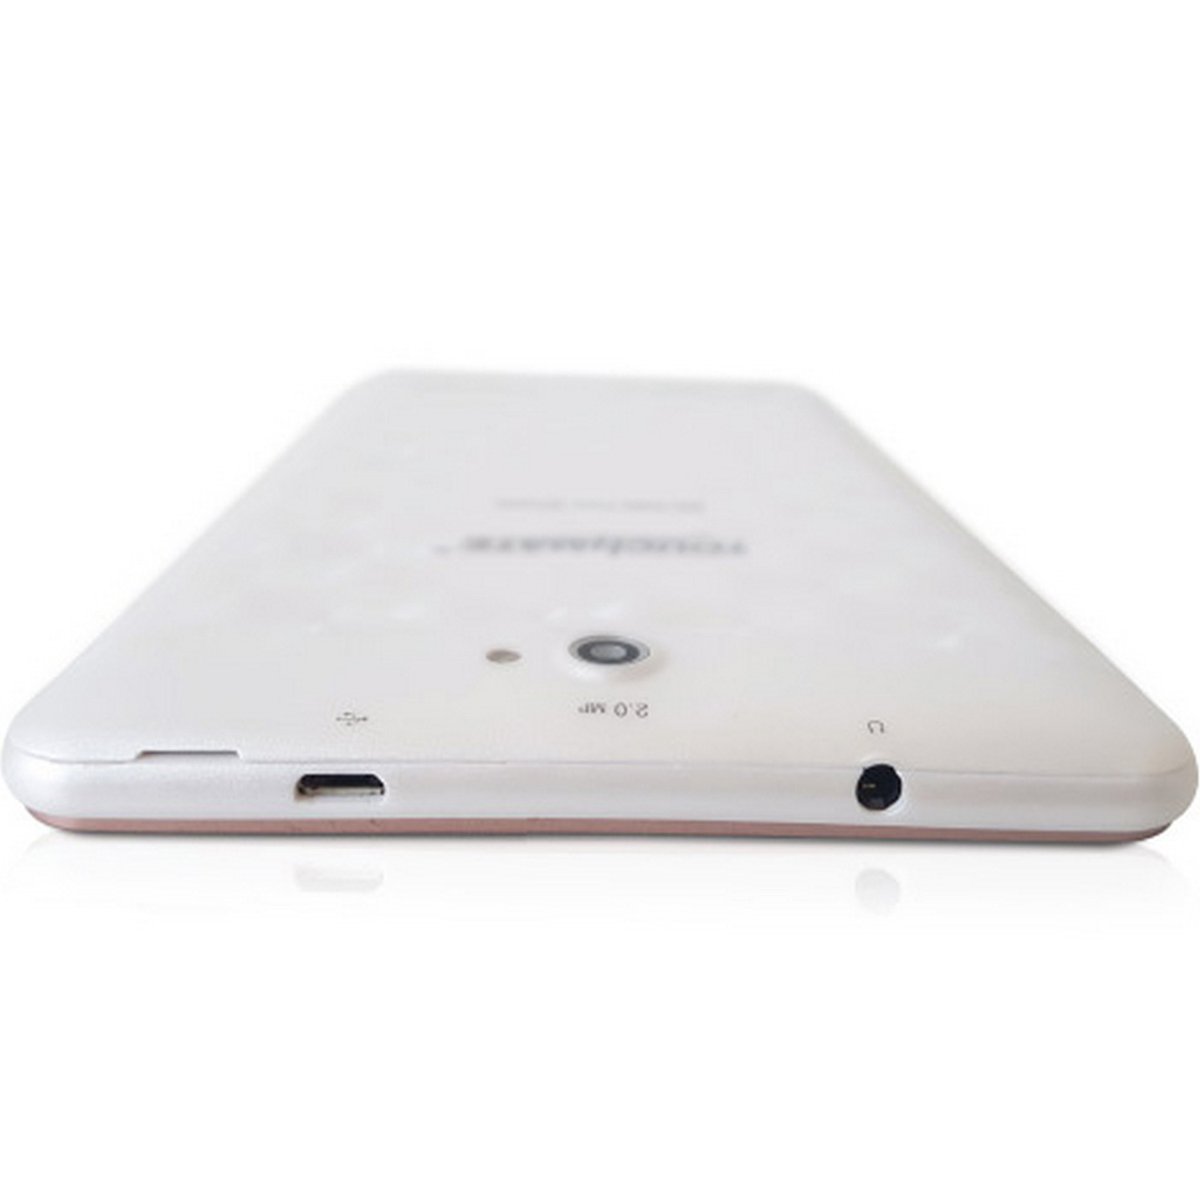 Touchmate Tablet MID794CW 7inch 8 GB,3G Wifi White